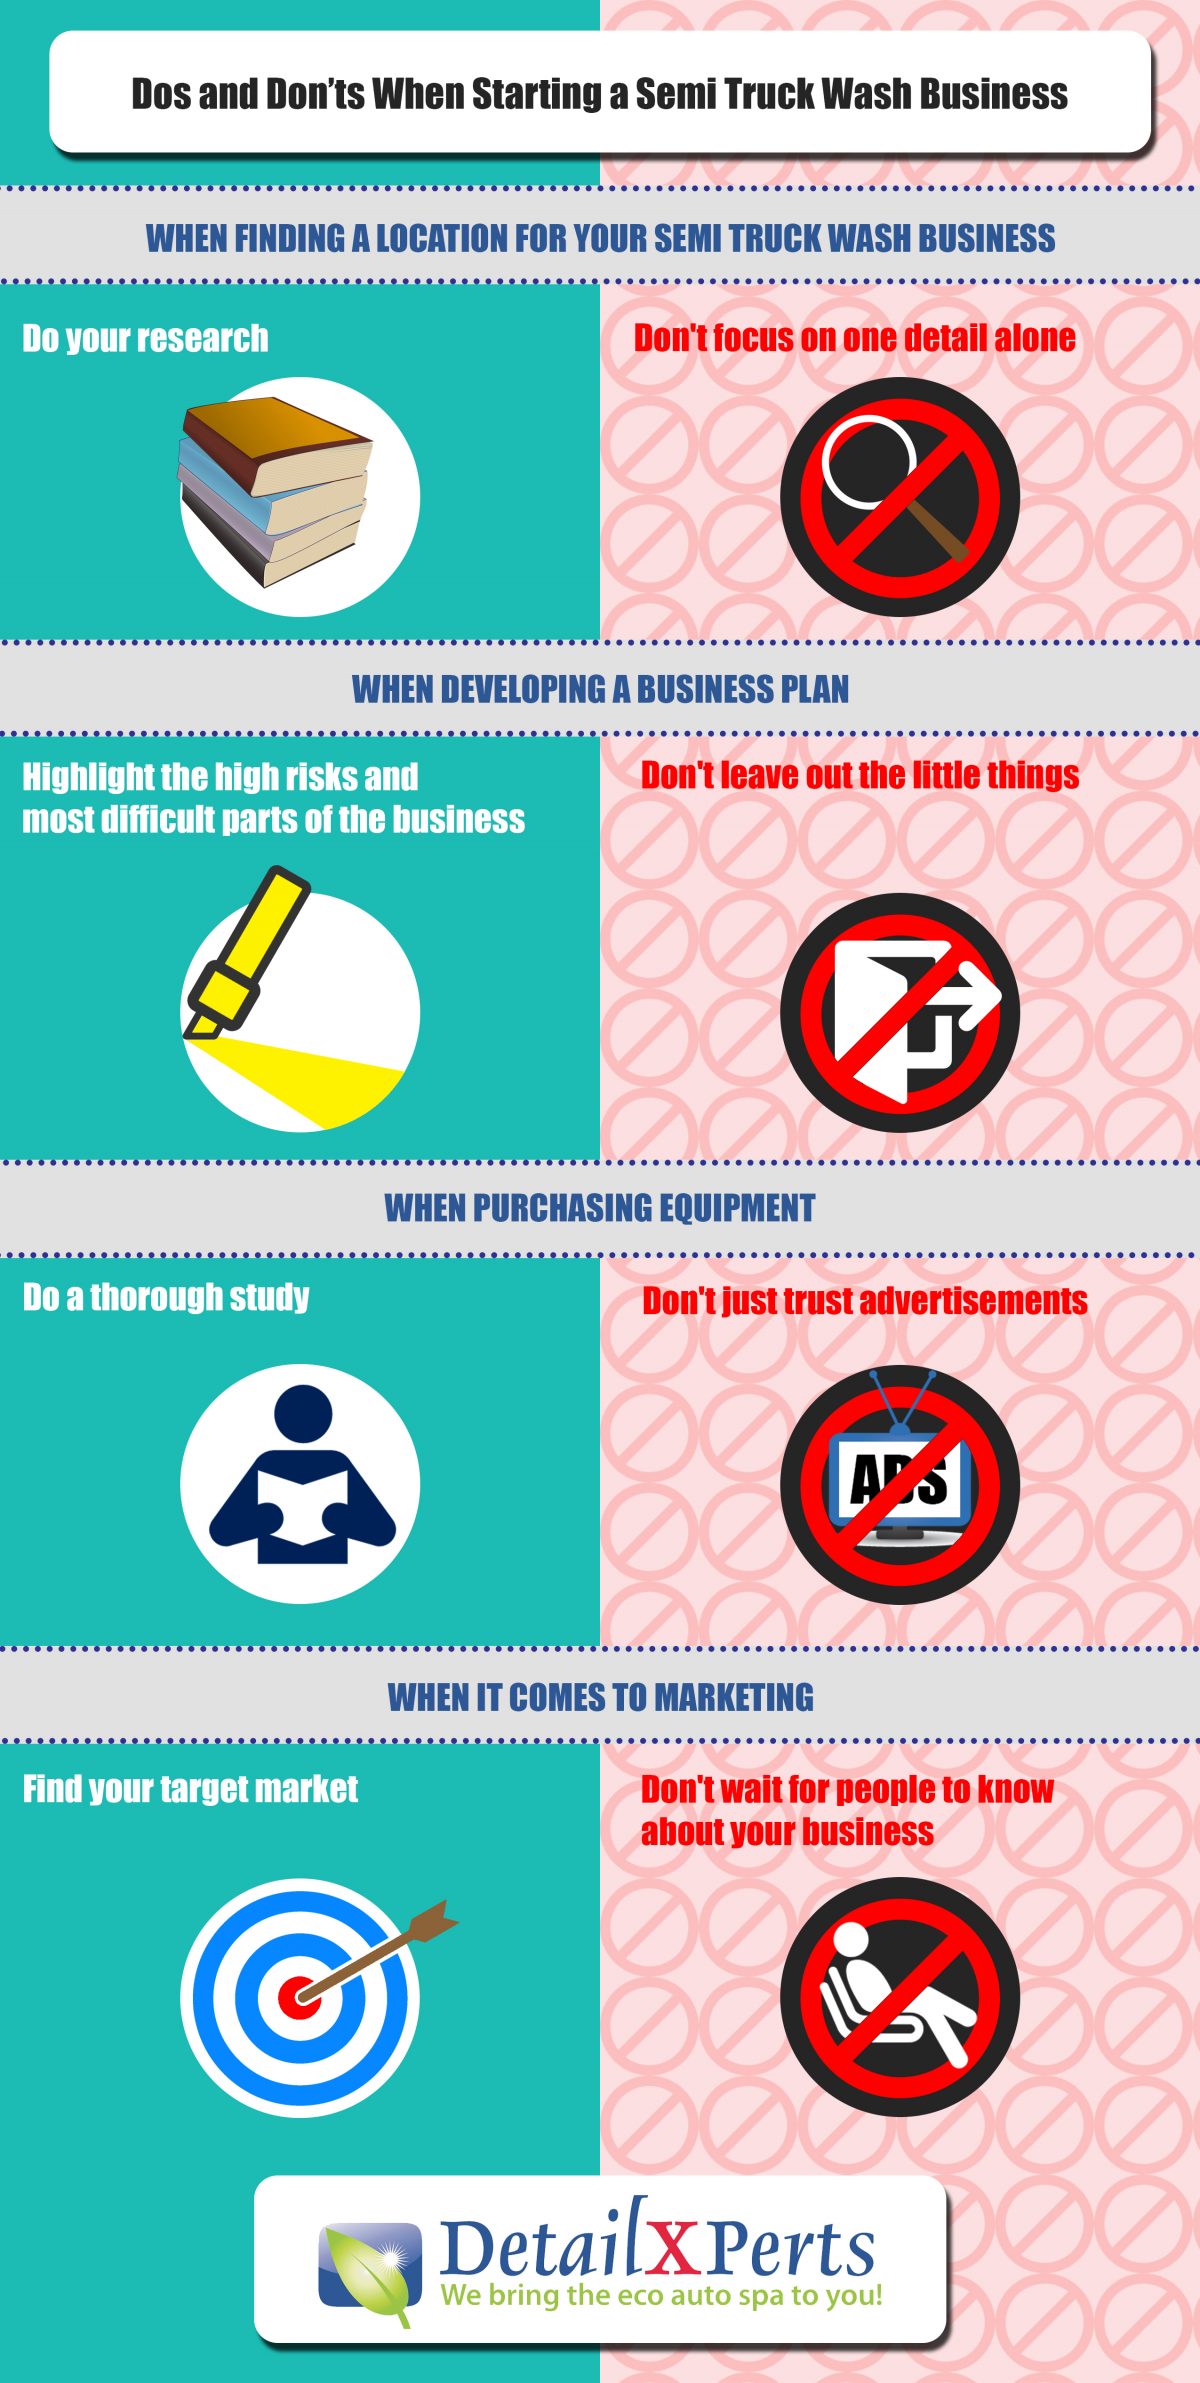 Dos and Don’ts When Starting a Semi Truck Wash Business (Infographic)